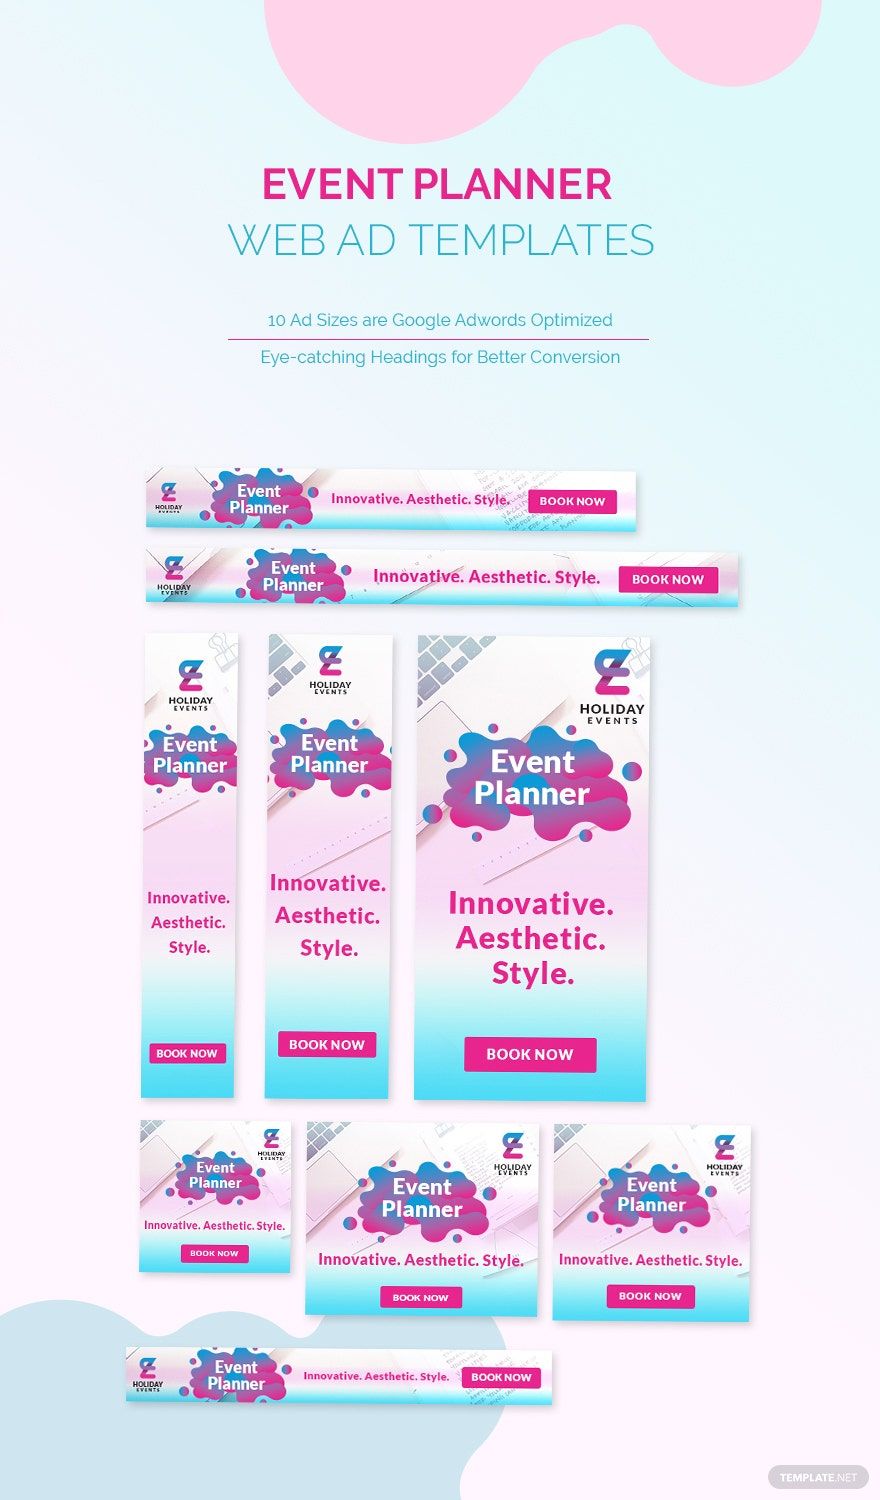 Event Planner Web Ad Template in PSD